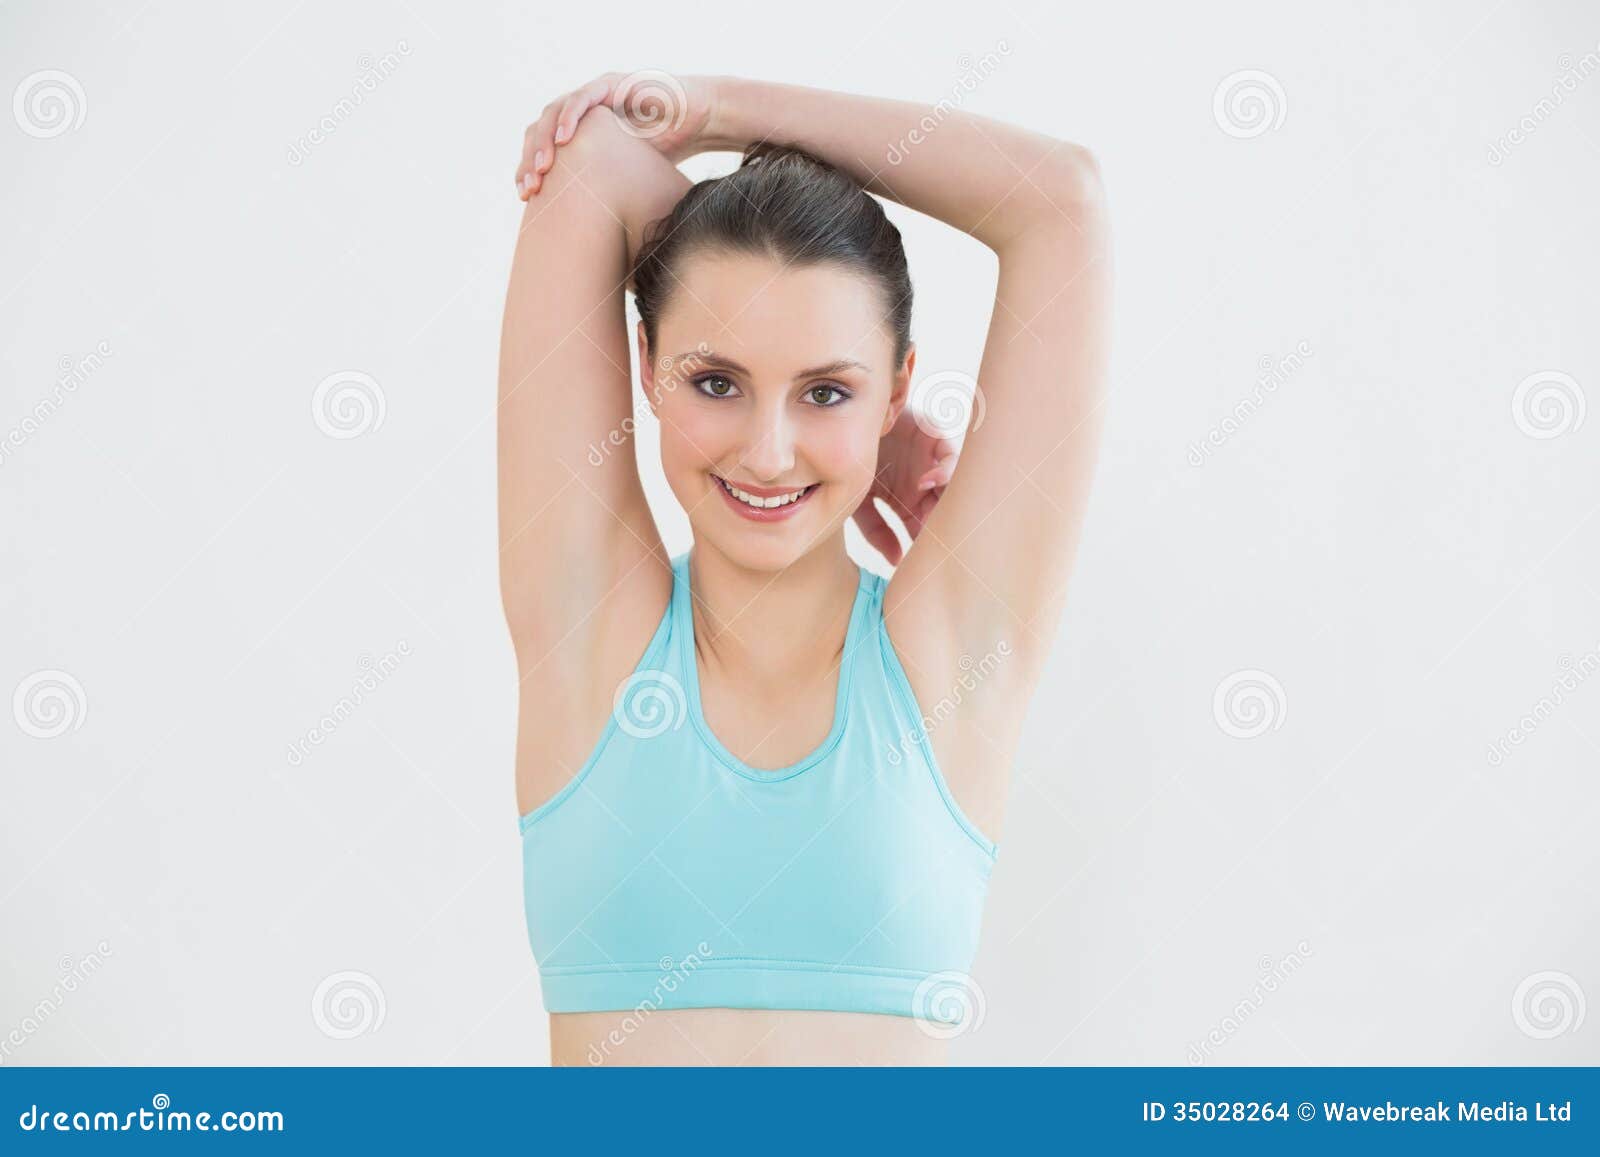 Photo about Portrait of a toned young woman stretching hands behind head ag...